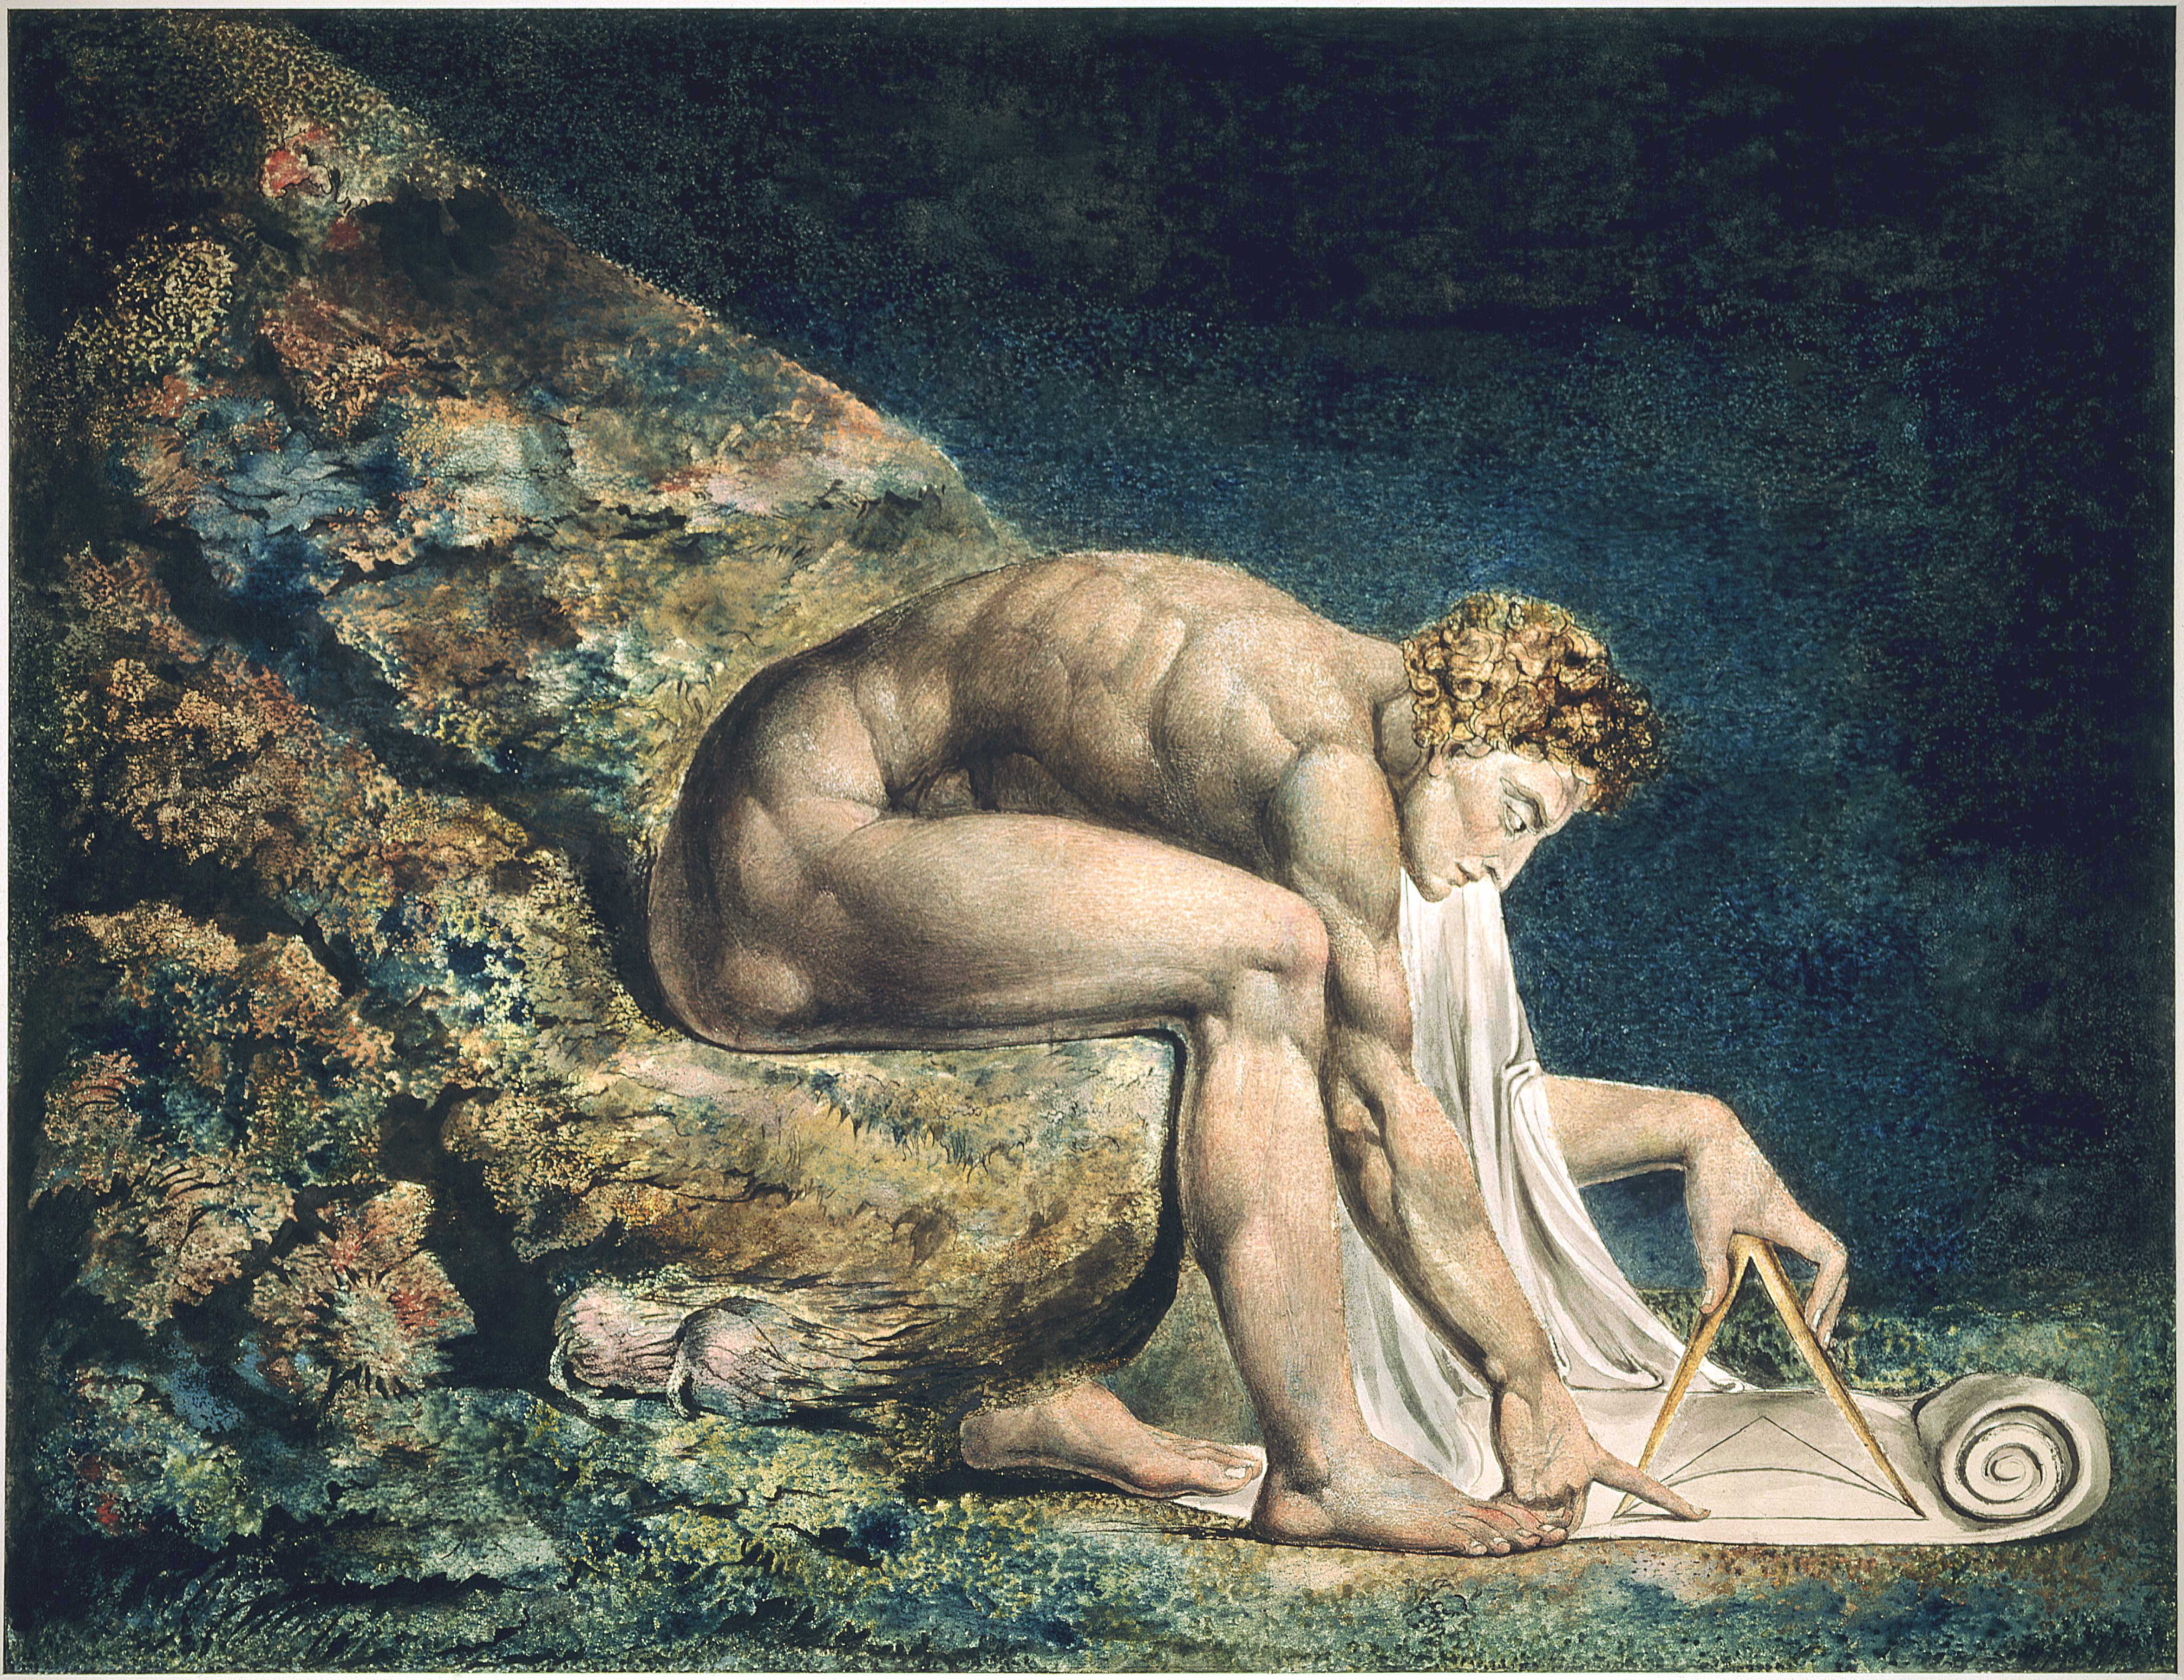 Photo of William Blakes painting of a naked man using a compas, a drawing instrument.